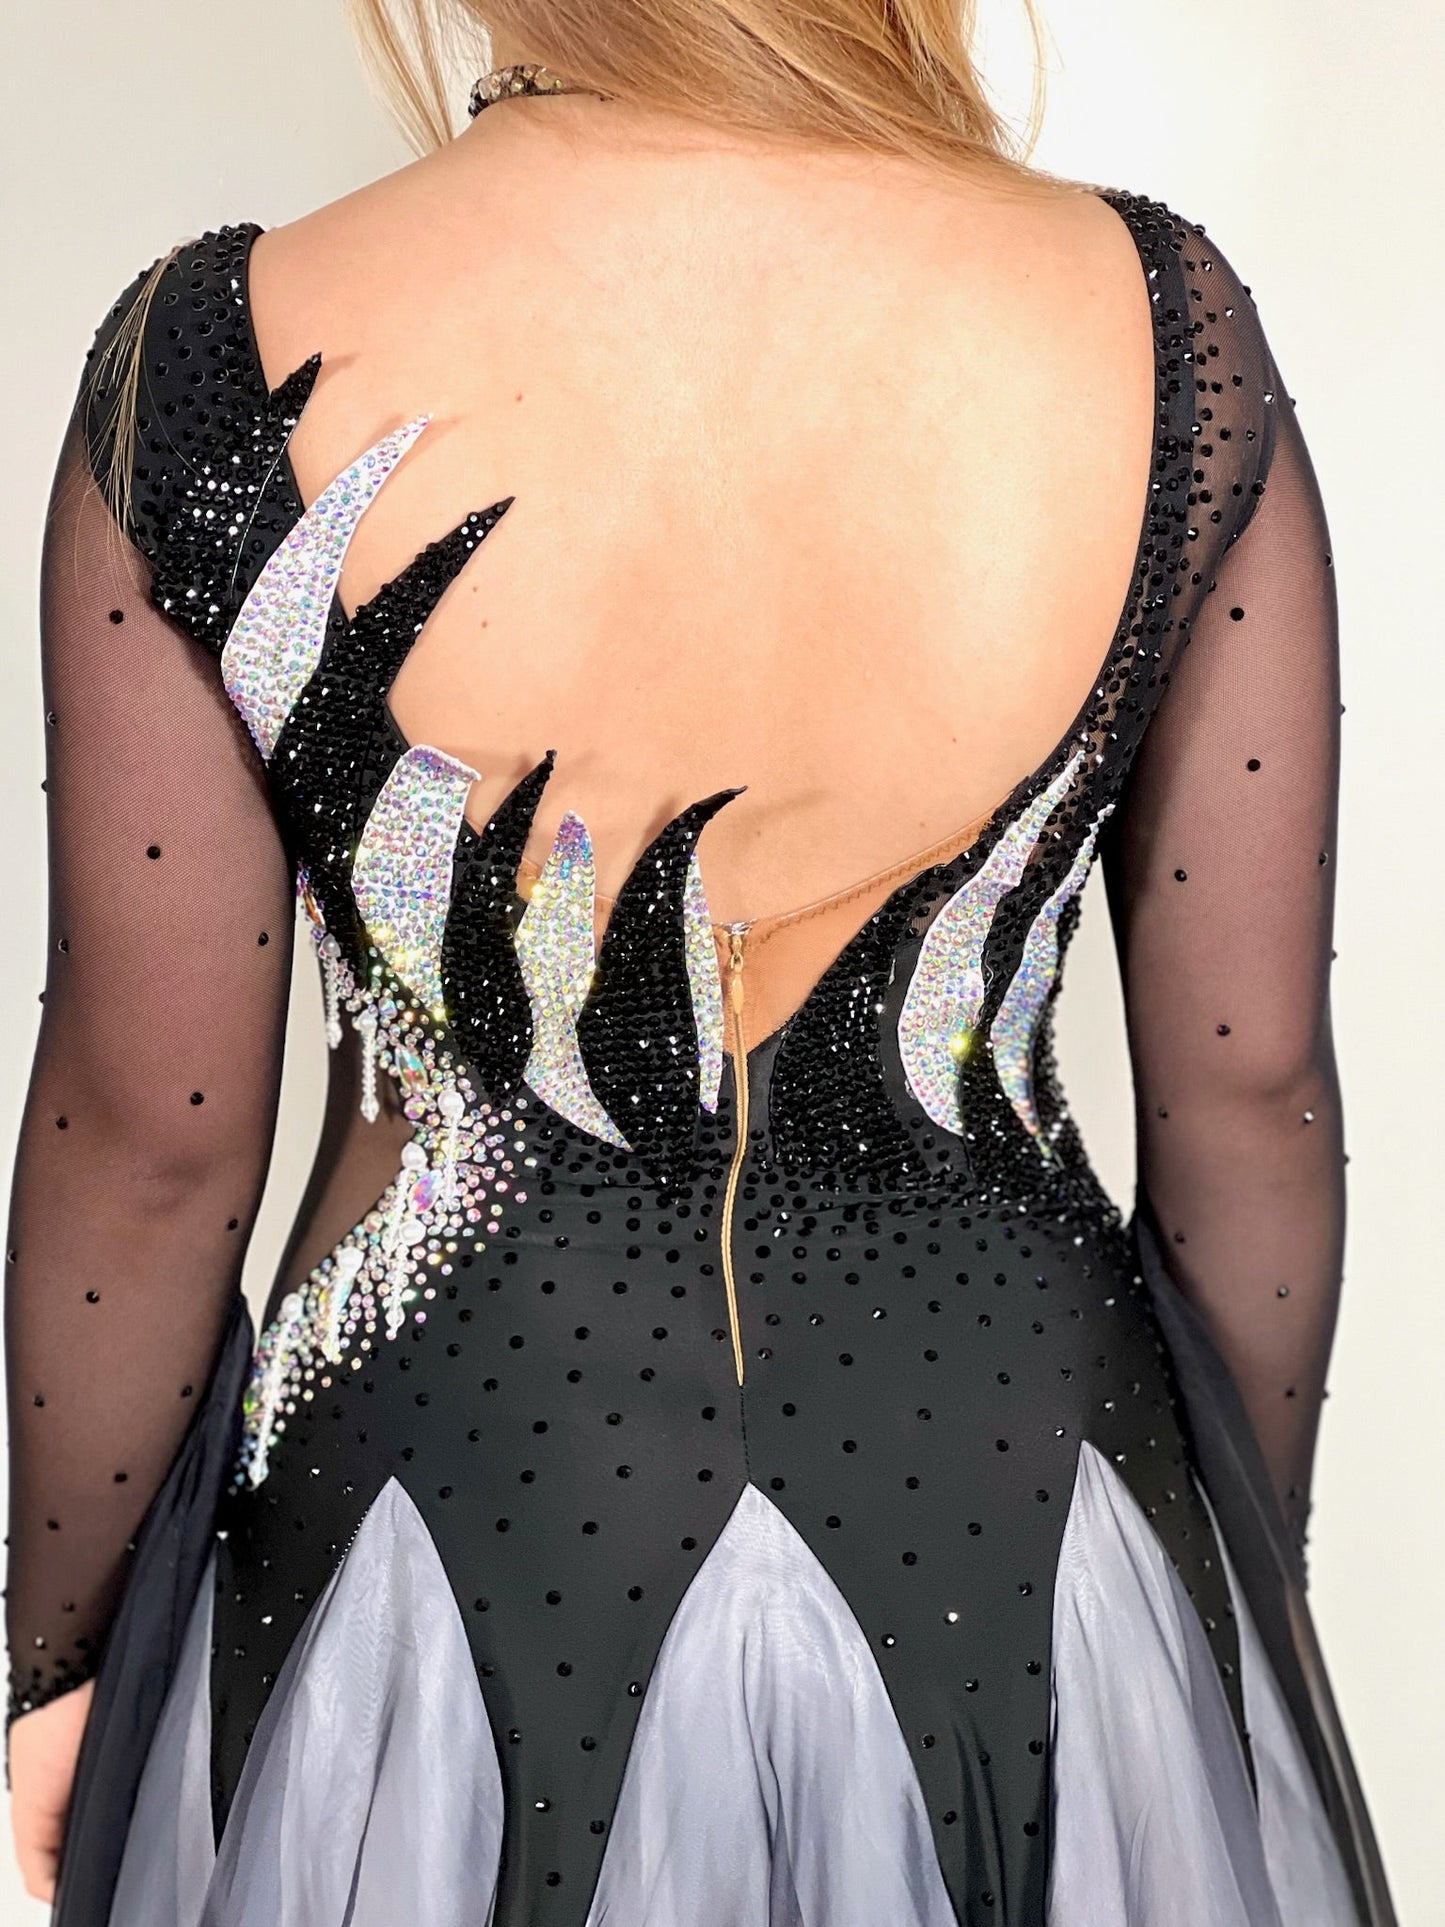 331 White & Black Ombré Ballroom Dress. Detailing to the chest and back. Decorated in Jet and AB stones with floats from the lower arm.